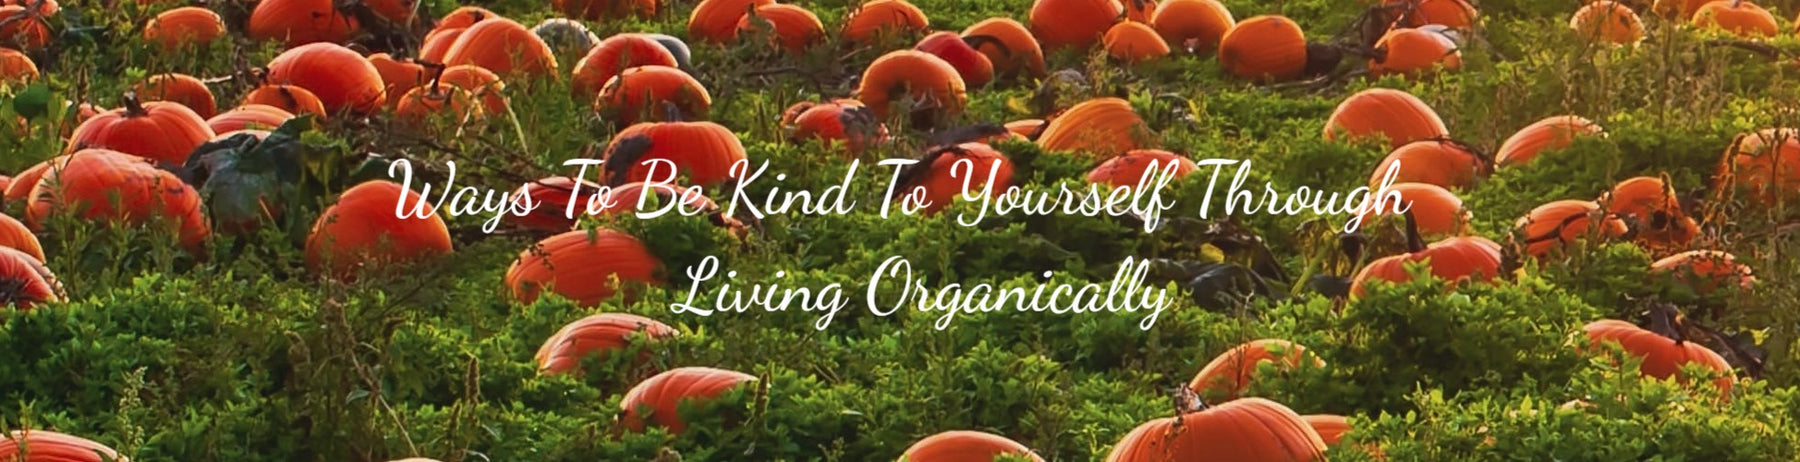 Ways To Be Kind To Yourself Through Living Organically